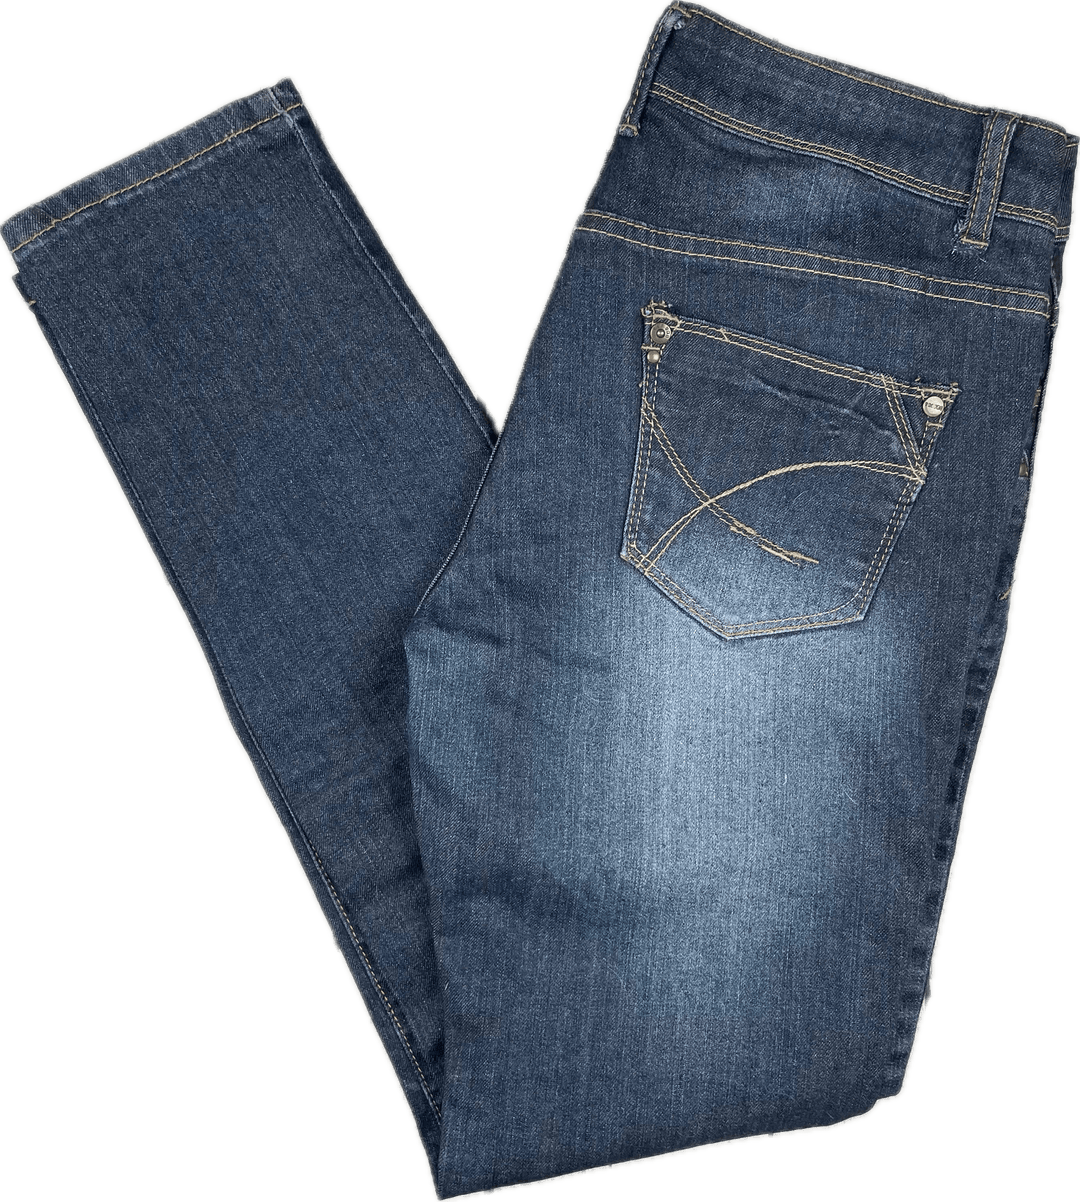 Yes Yes Jeans UK Mid Rise Skinny Jeans - Size 12 - Jean Pool